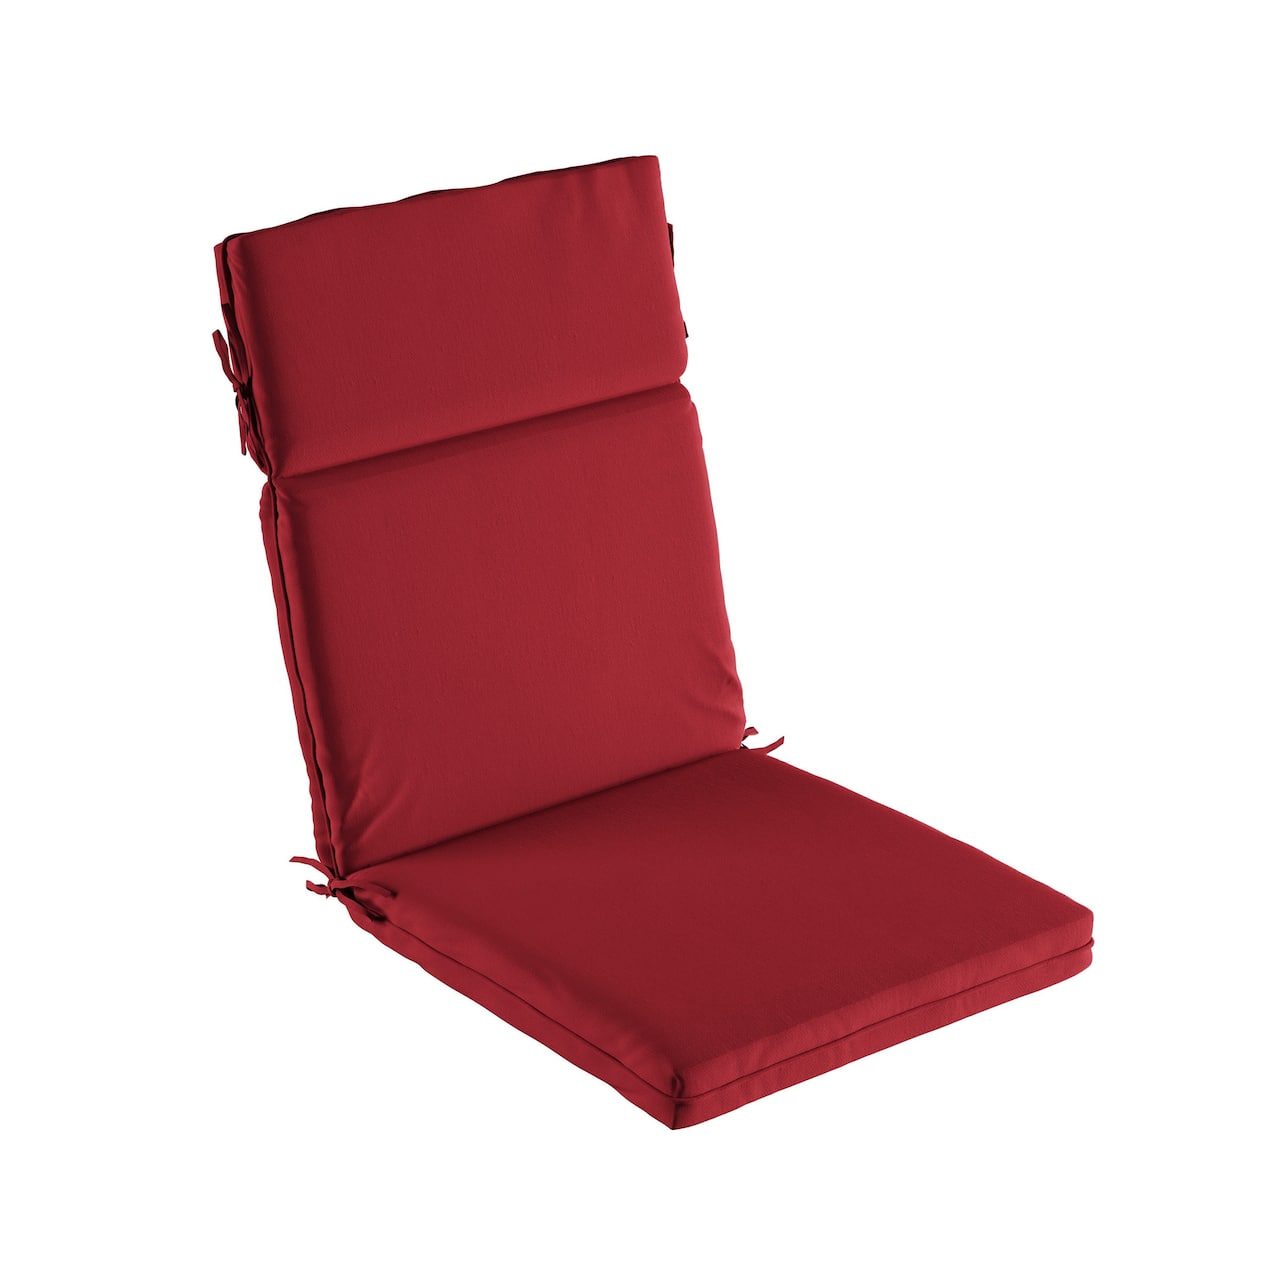 hastings home red high back patio chair cushion | michaels